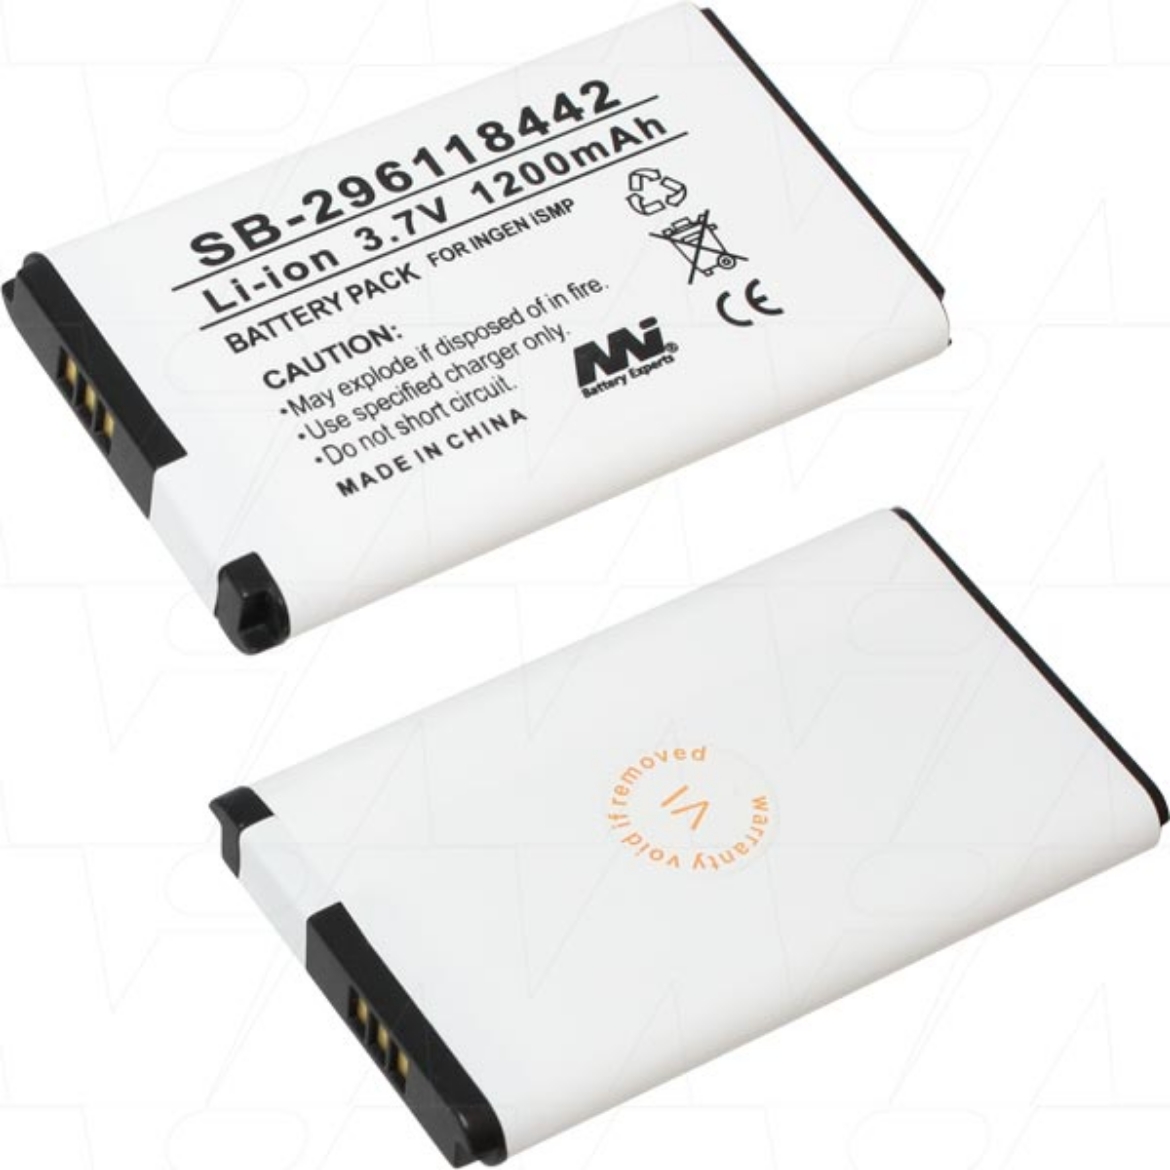 Picture of SB-296118442 3.7V 1.2AH REPLACEMENT BATTERY FOR INGENICO ISMP COMPANION POINT-OF-SALE PAYMENT TERMINAL